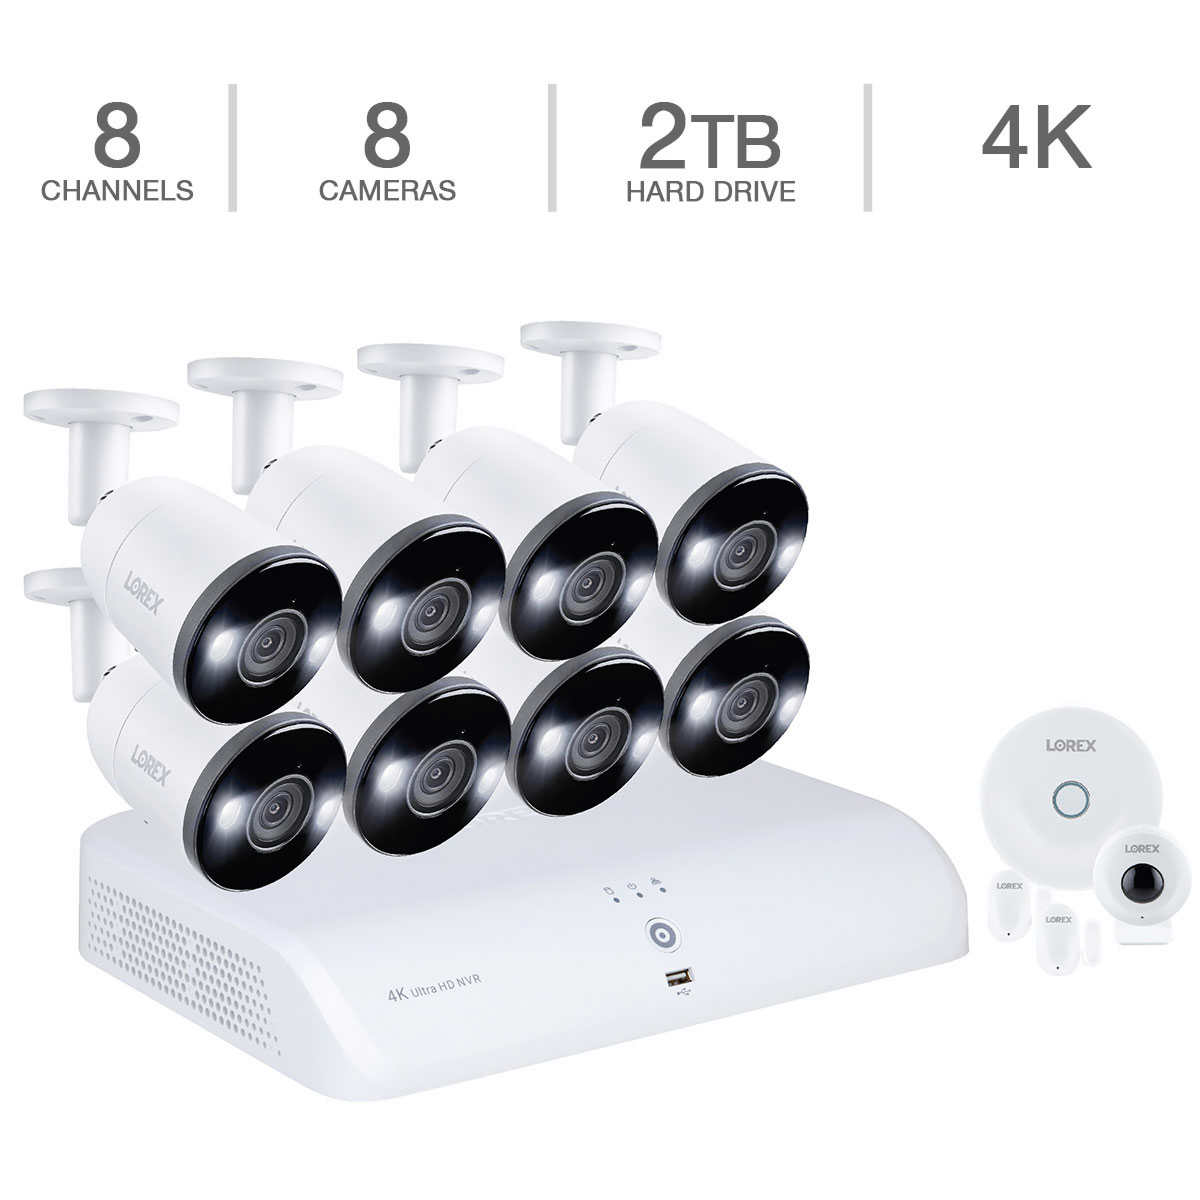 Costco - Lorex 4K UHD 8-channel Fusion NVR Security System with 8 Smart Deterrence 4K Cameras Valid 8/4/21 – 8/29/21 $649.99